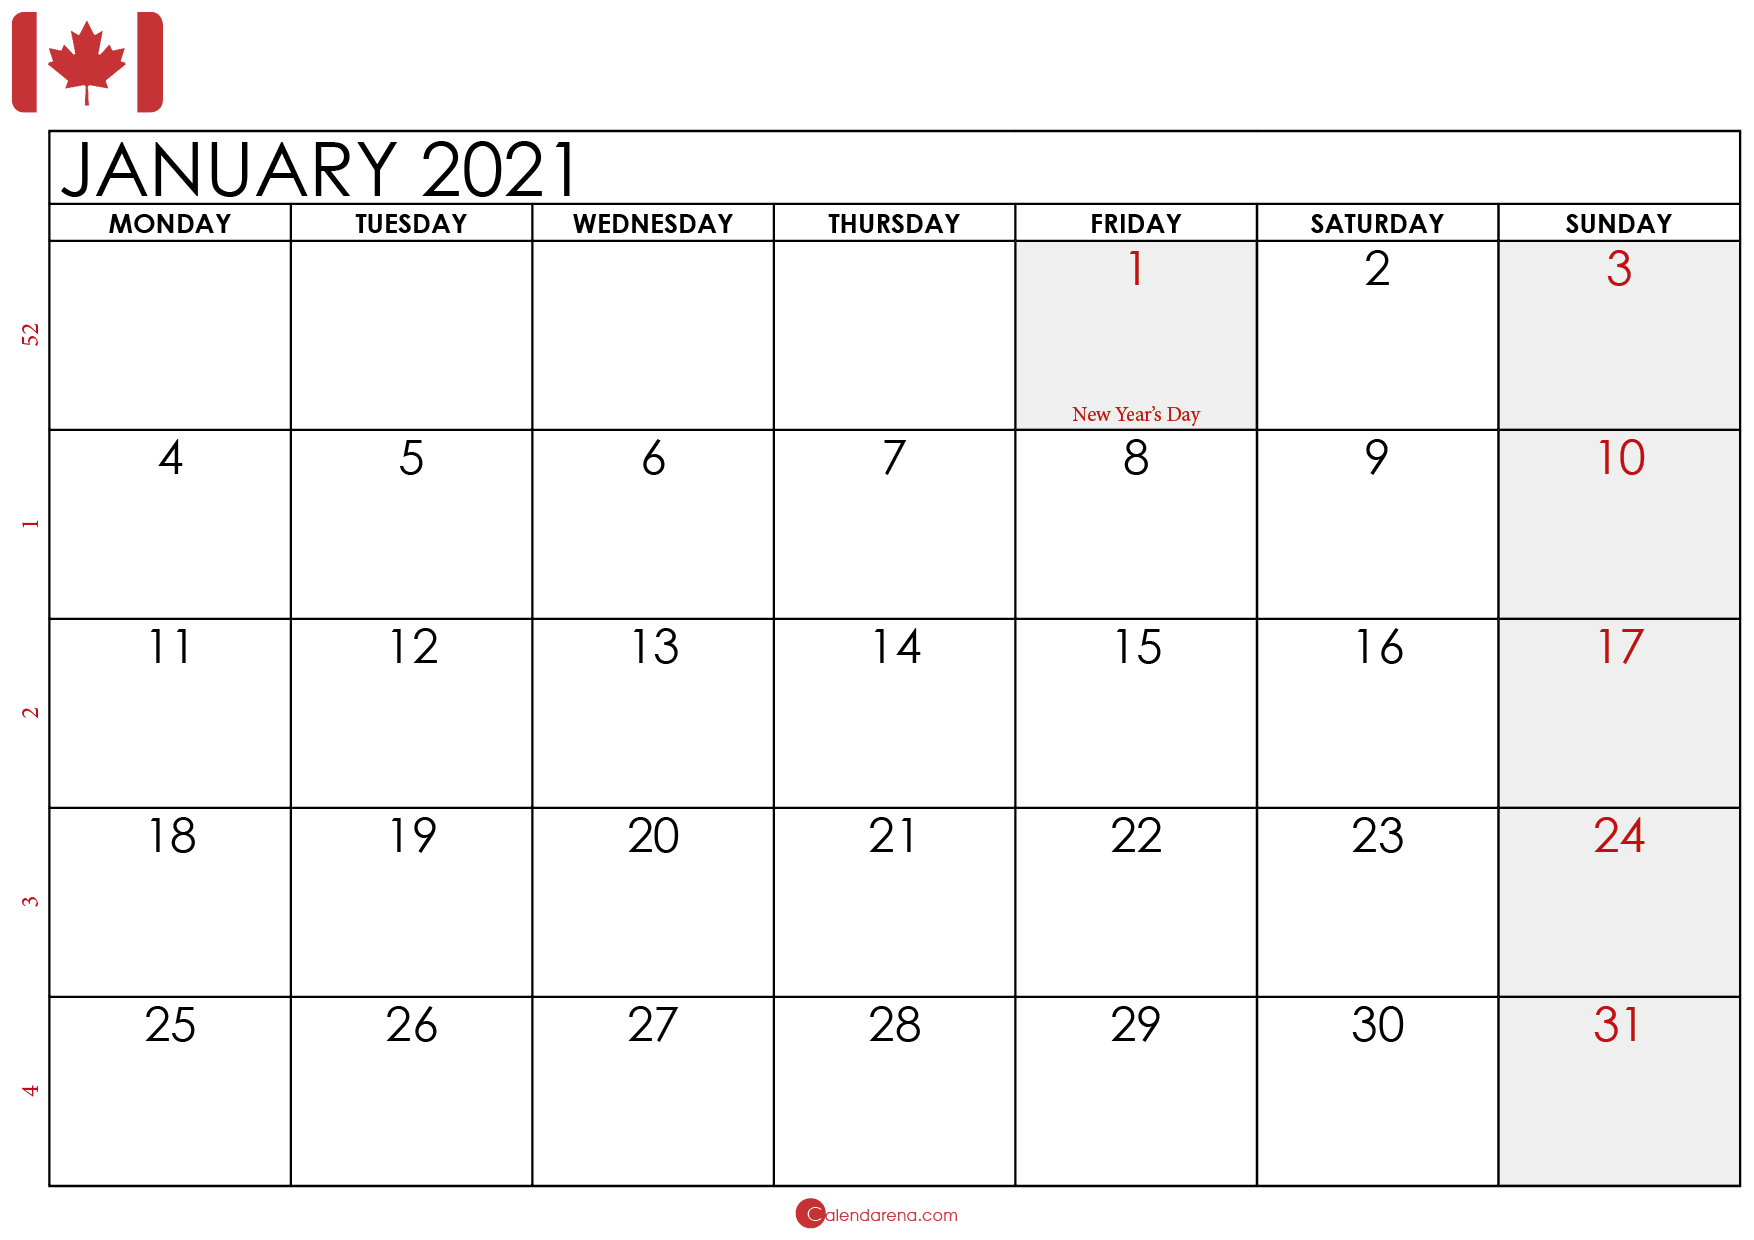 Download Free January 2021 Calendar Canada???? With Weeks Calendar Showing December 2020 And January 2021